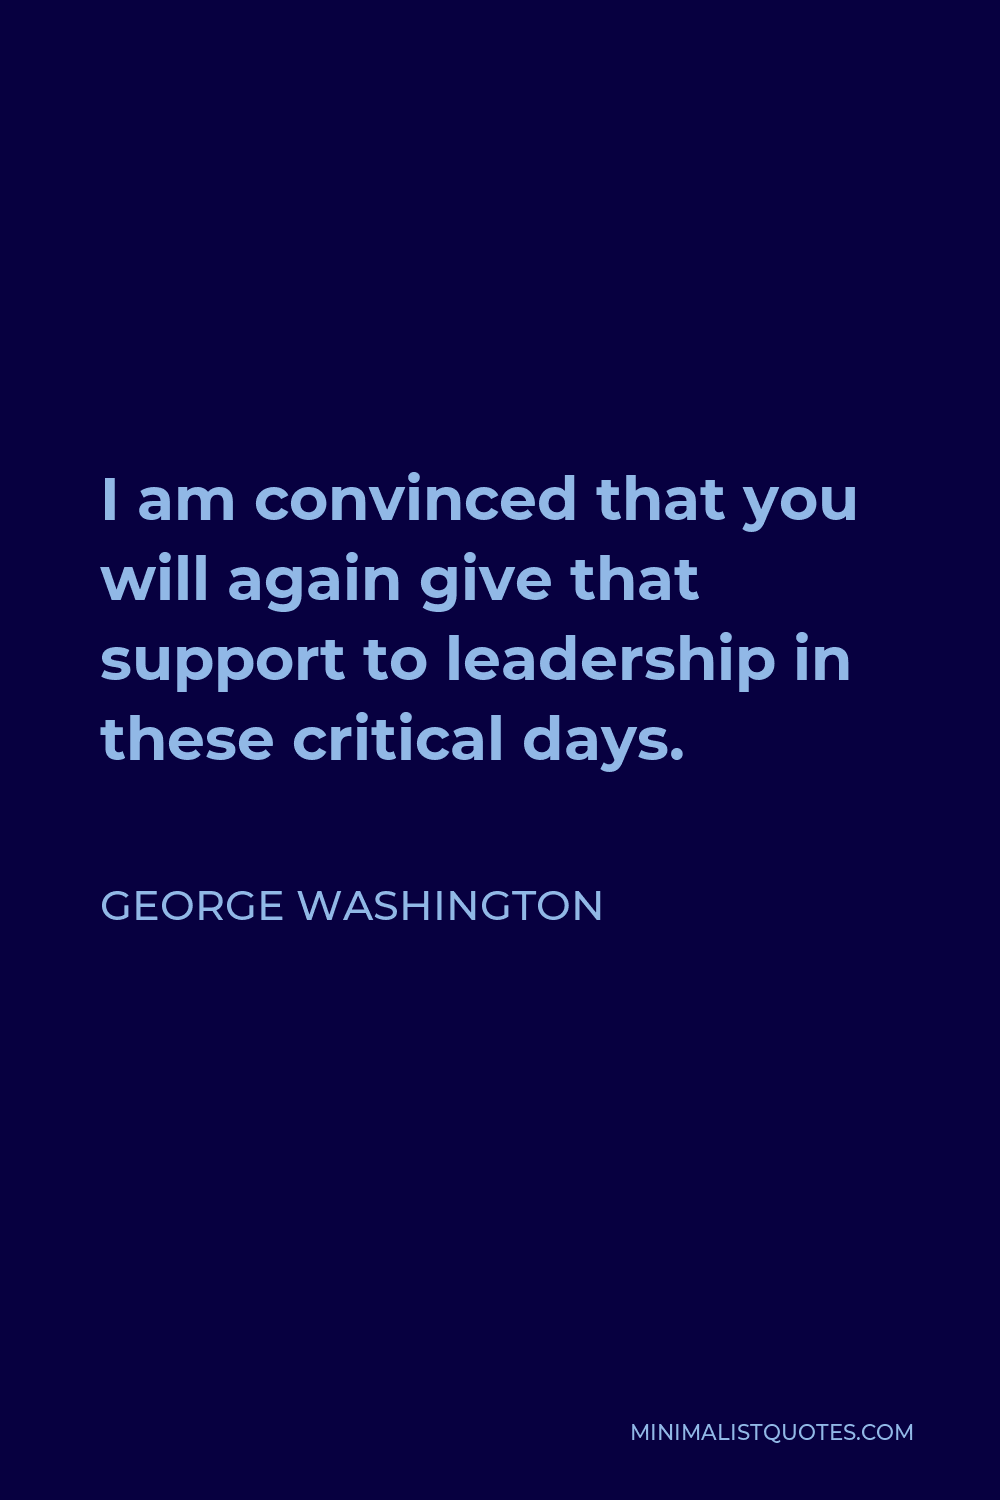 George Washington Quote - I am convinced that you will again give that support to leadership in these critical days.